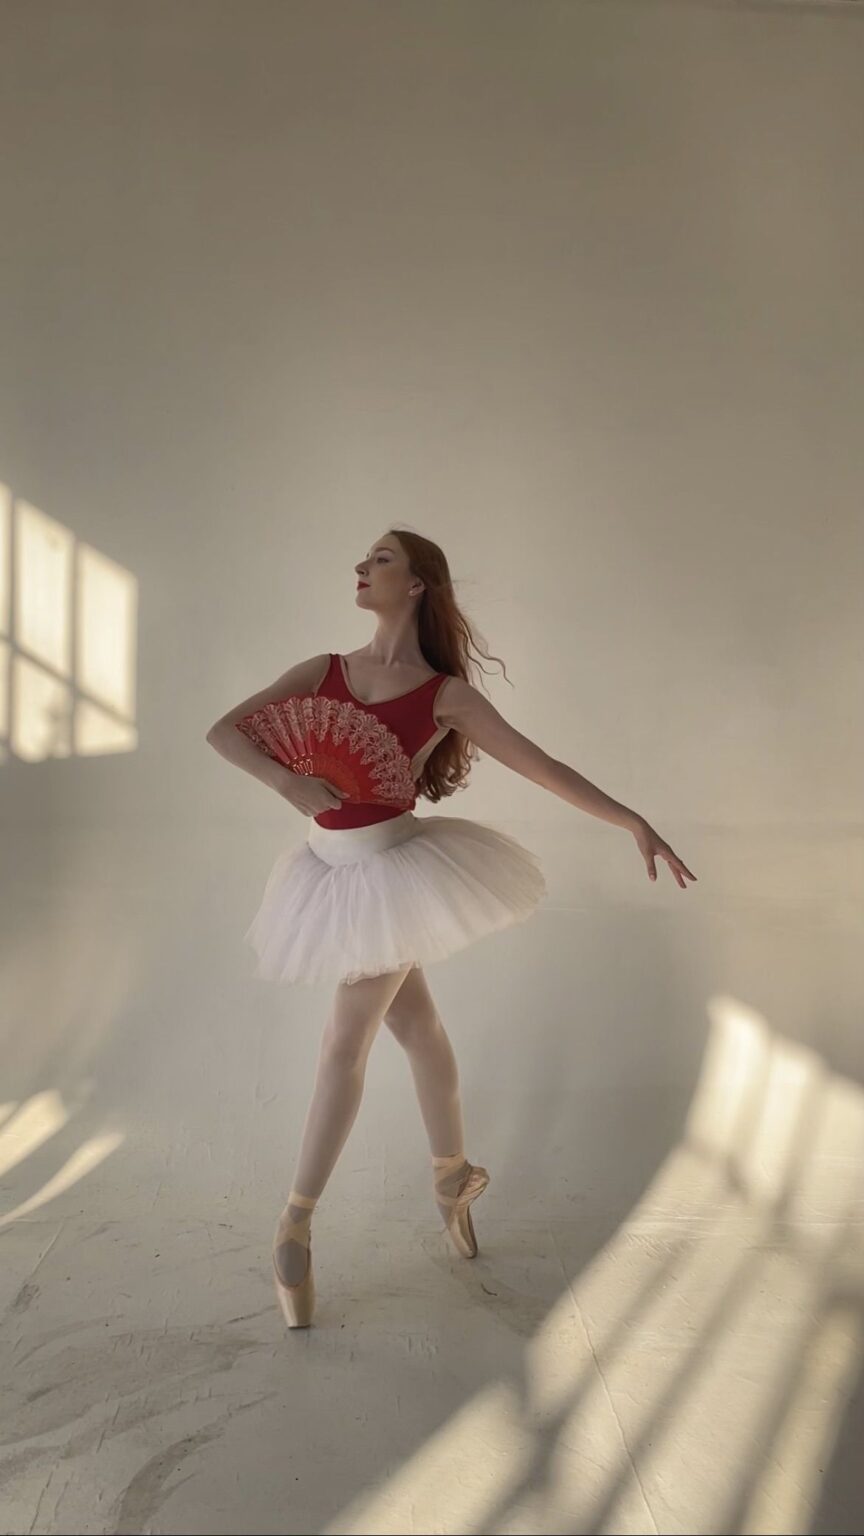 New York City's ballet scene has gained a radiant star, Abbi Johnson. Take a look at the new ballet sensation.